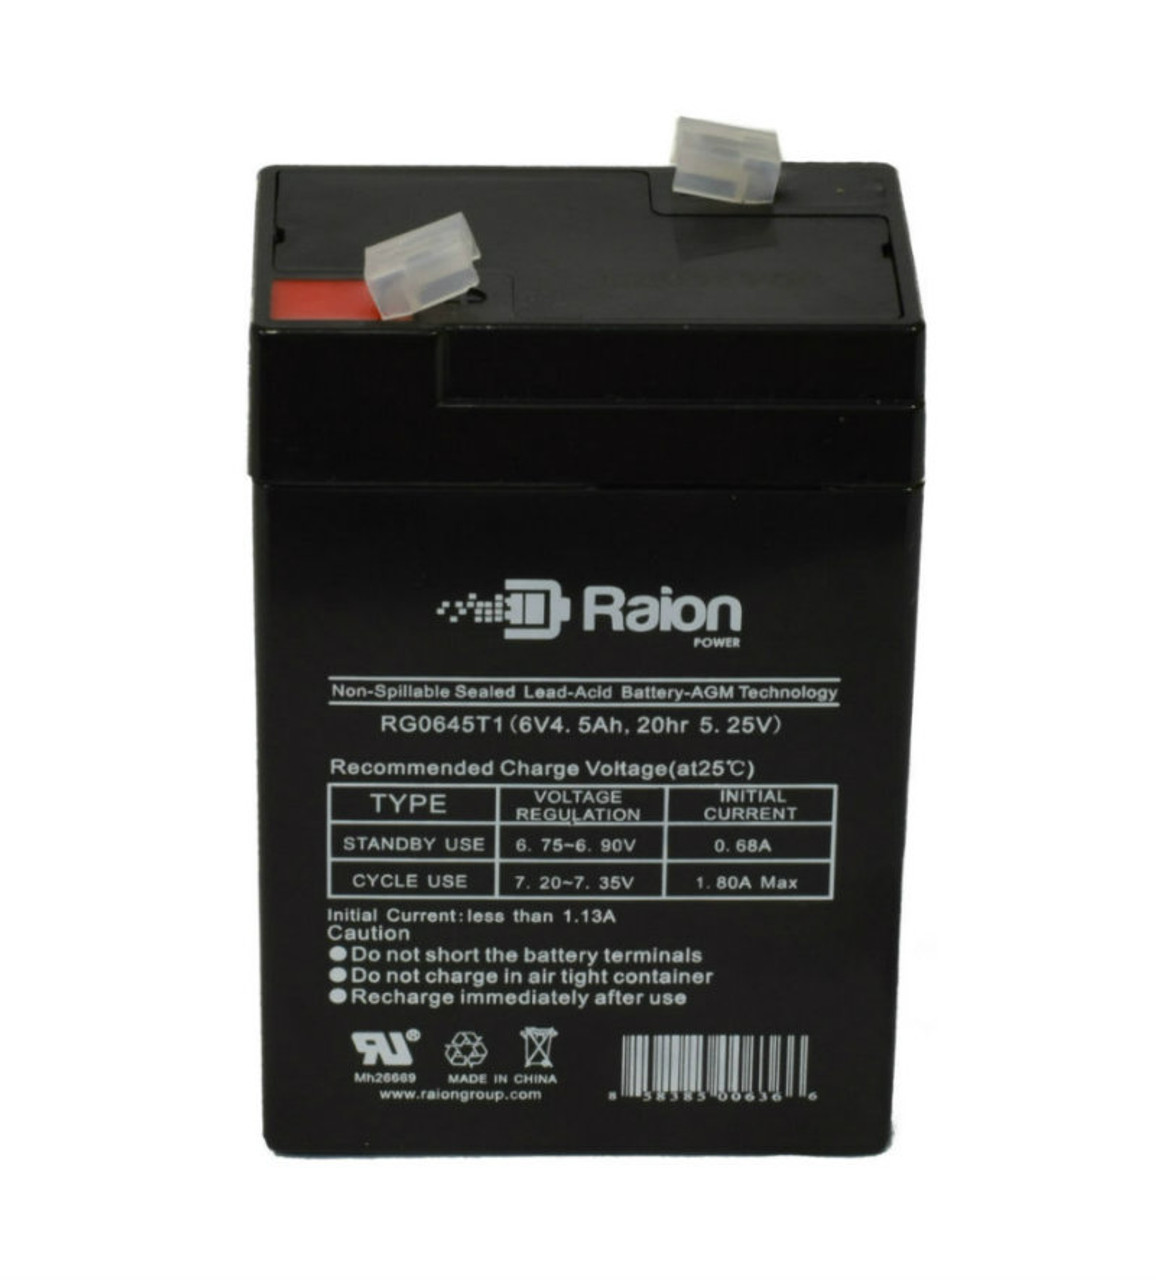 Raion Power RG0645T1 Replacement Battery Cartridge for Criticare Systems 502